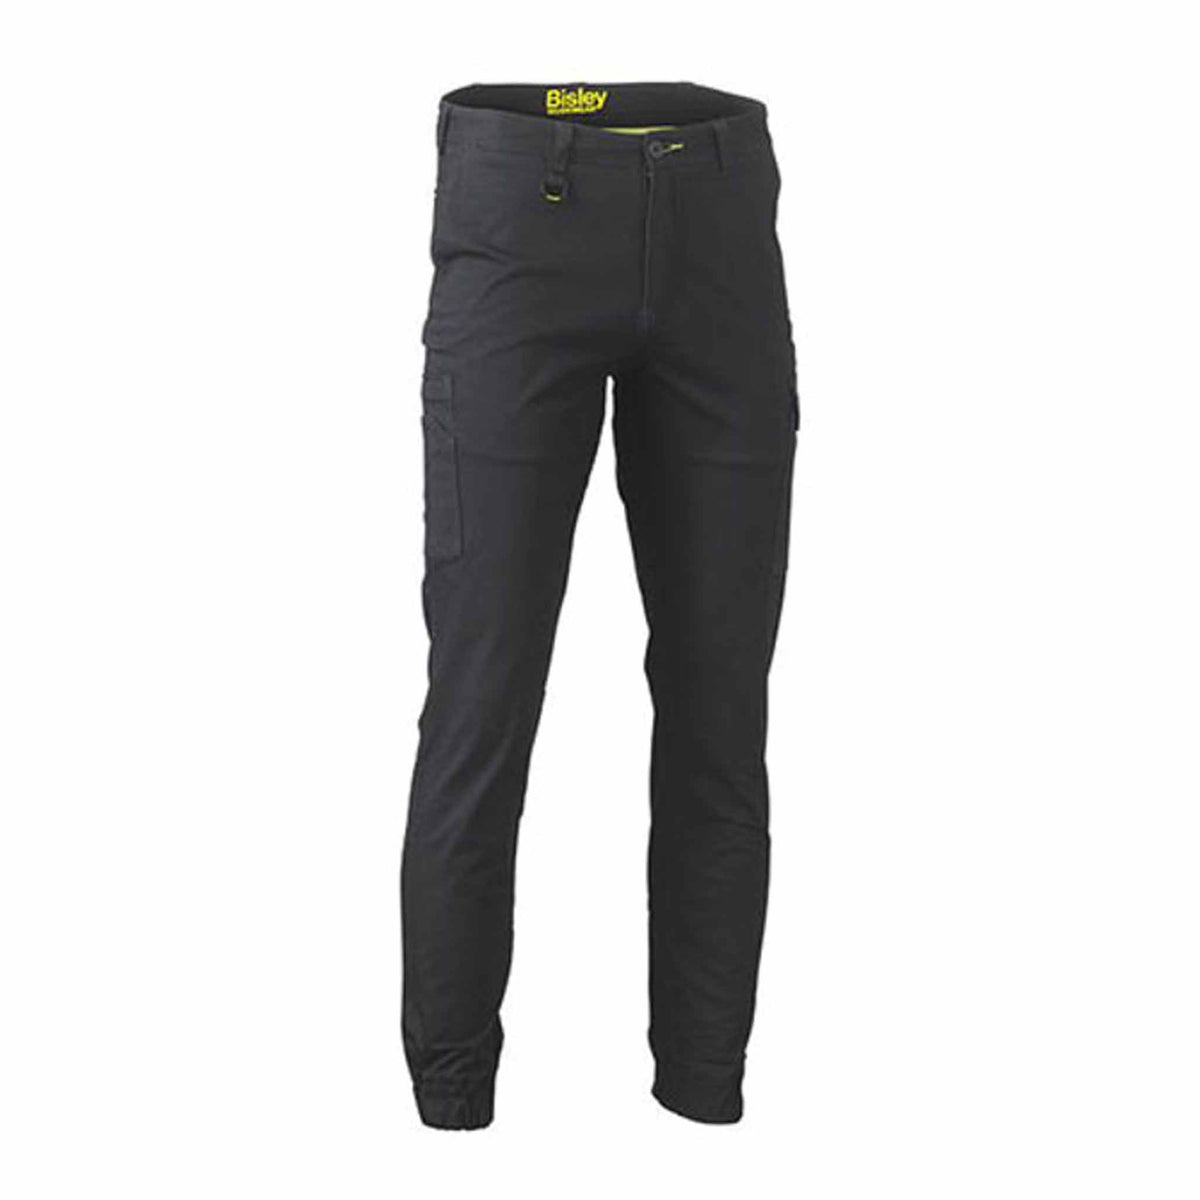 bisley stretch cotton drill cargo cuffed pants in black